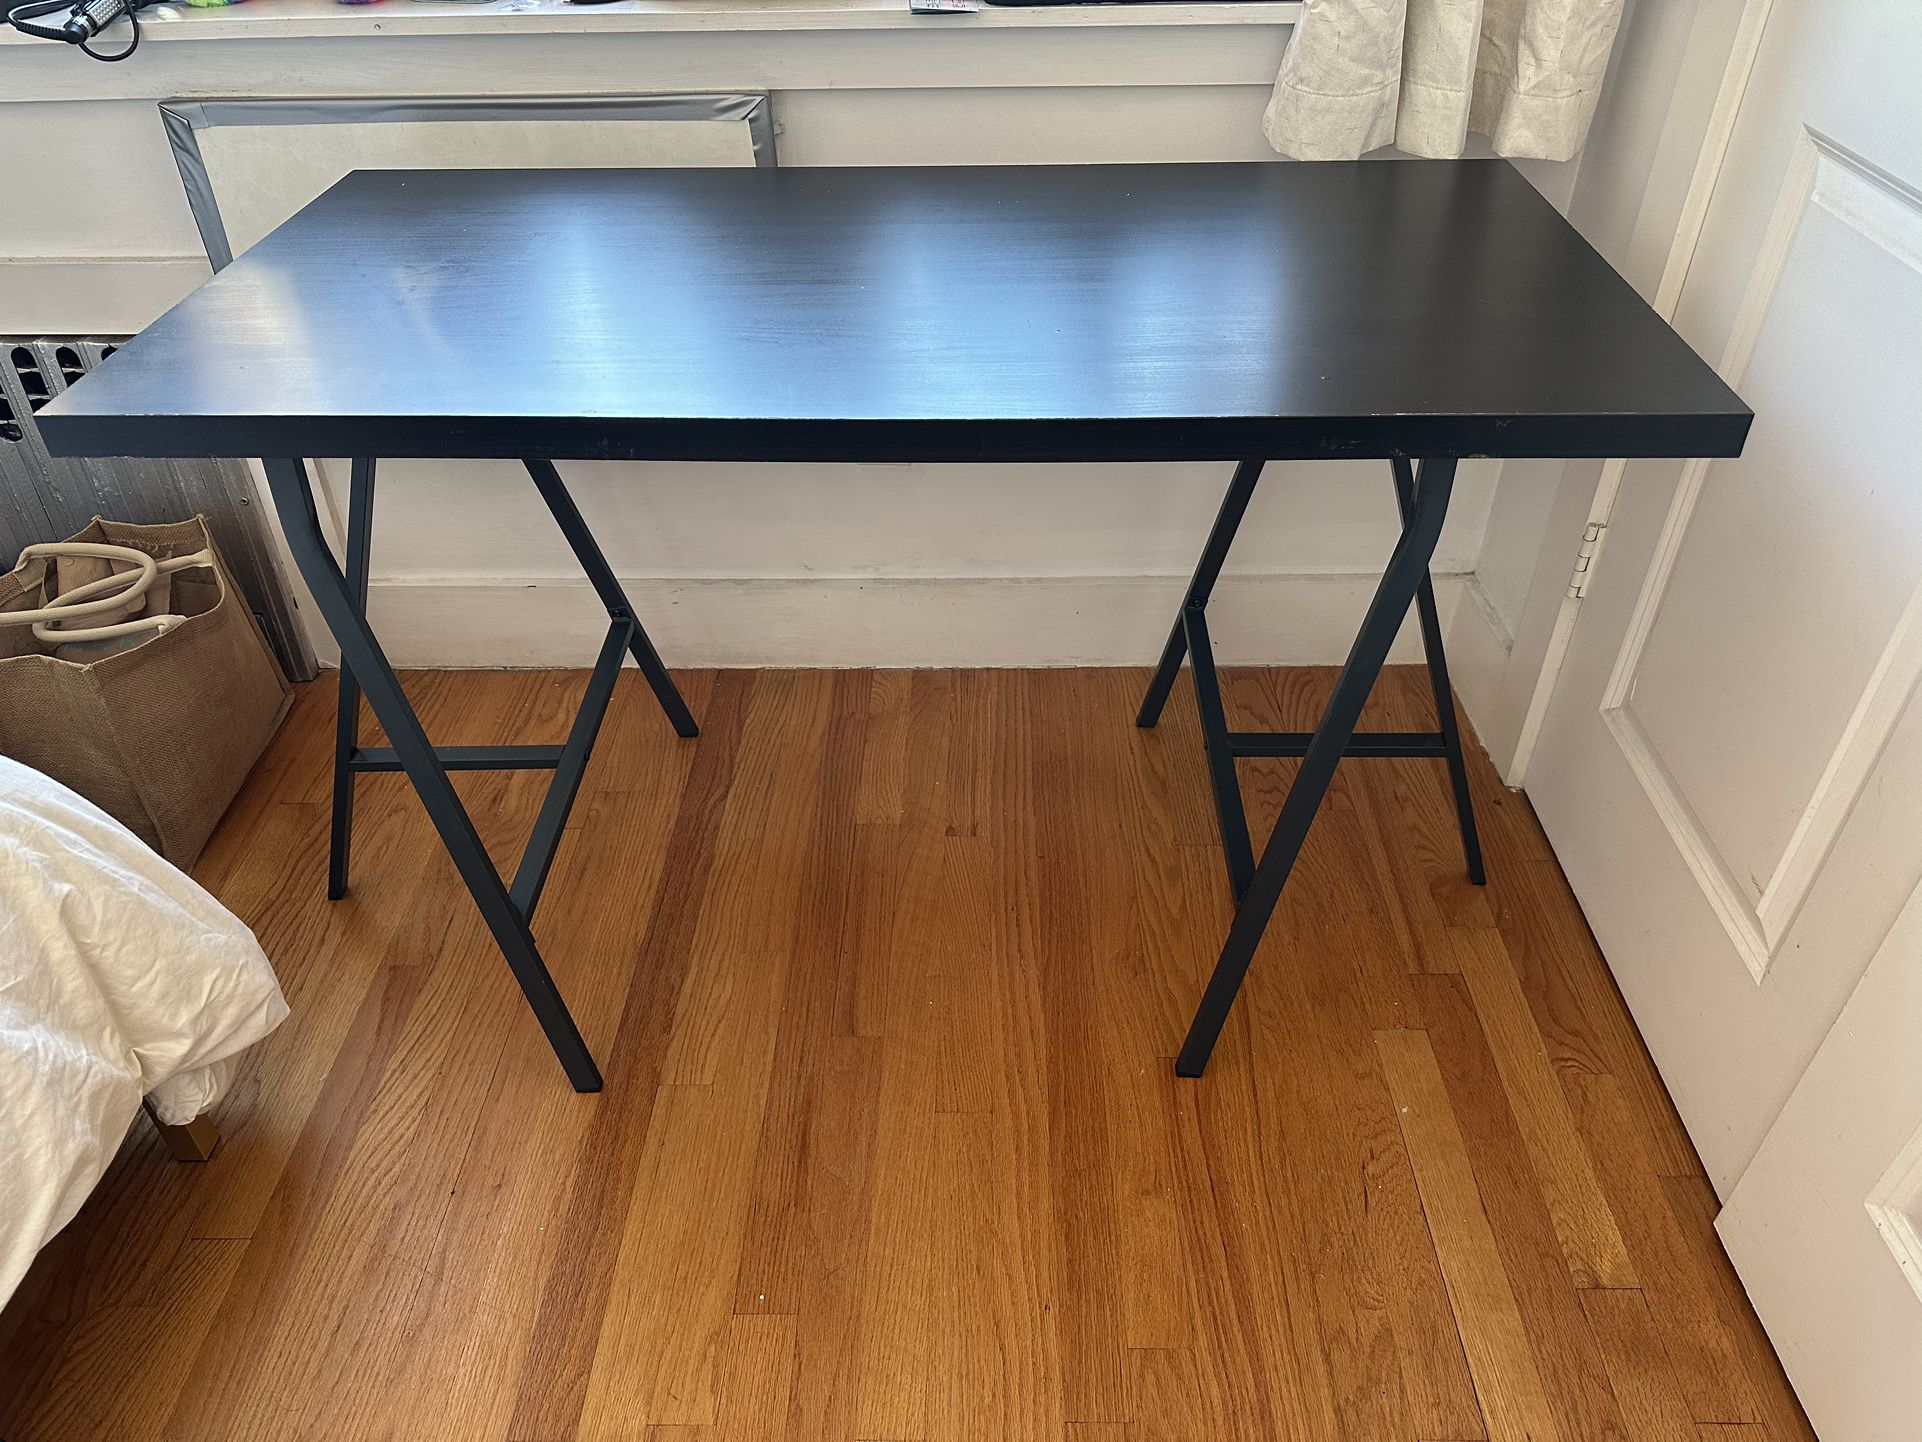 4’x2’ Table 29” Height With Adjustable Width Legs